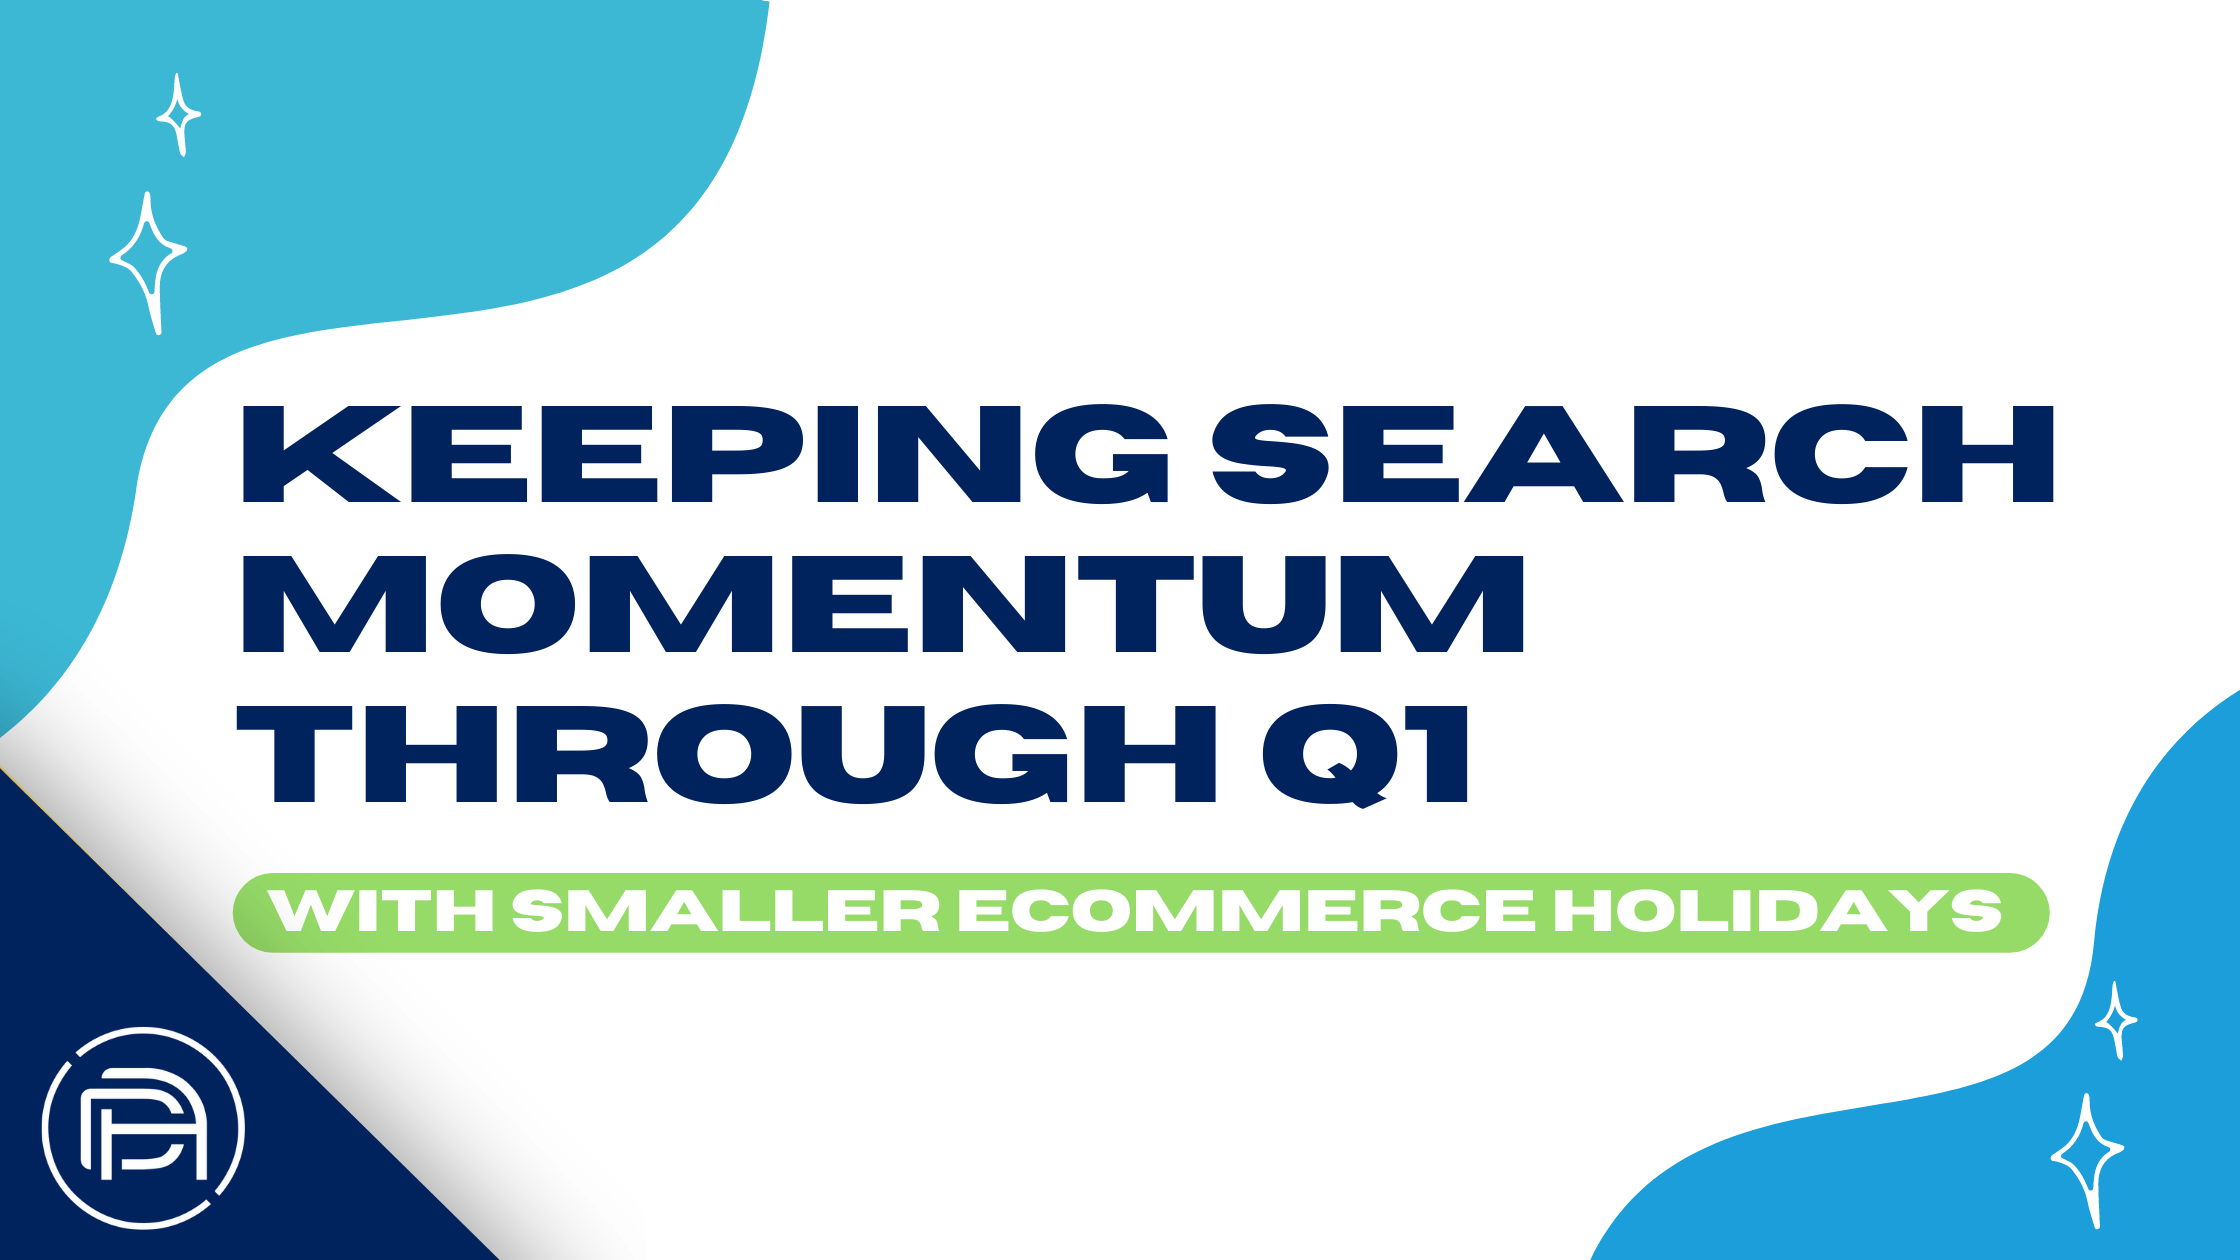 Keeping Search Momentum Through Q1 with Smaller Ecommerce Holidays